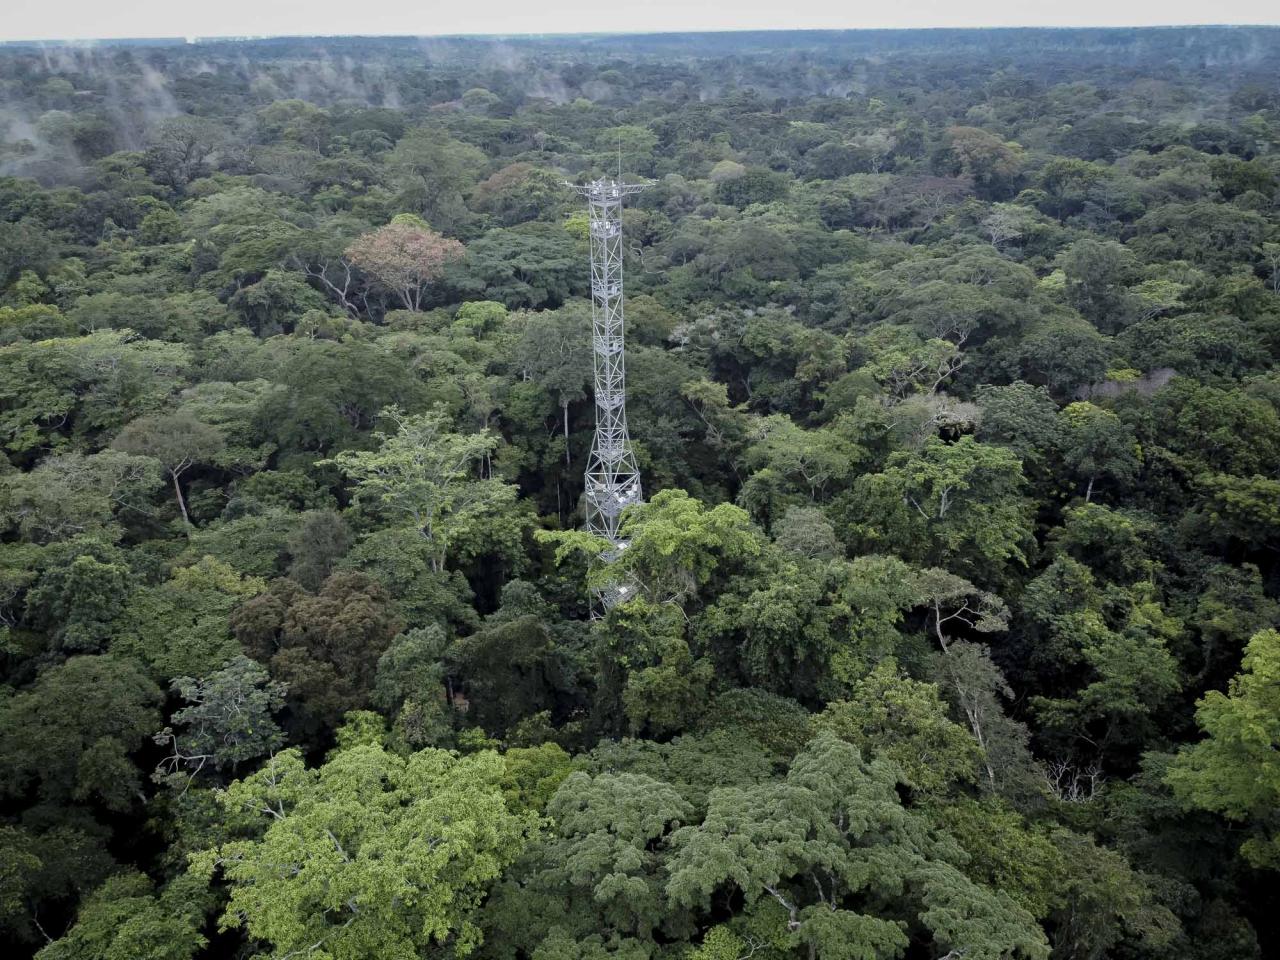 This aerial view shows trees in the Yangambi forest with the flux tower, 100 km from the city of Kisangani, in the Tshopo province, northeast of the Democratic Republic of the Congo on September 2, 2022. - The 55-meter high Flux Tower, which quantifies the carbon, absorbed or emitted by the forest, stands in the lush setting of the Yangambi biosphere reserve, which covers some 250,000 hectares along the Congo River, in the province of Tshopo. (Photo by Guerchom Ndebo / AFP)